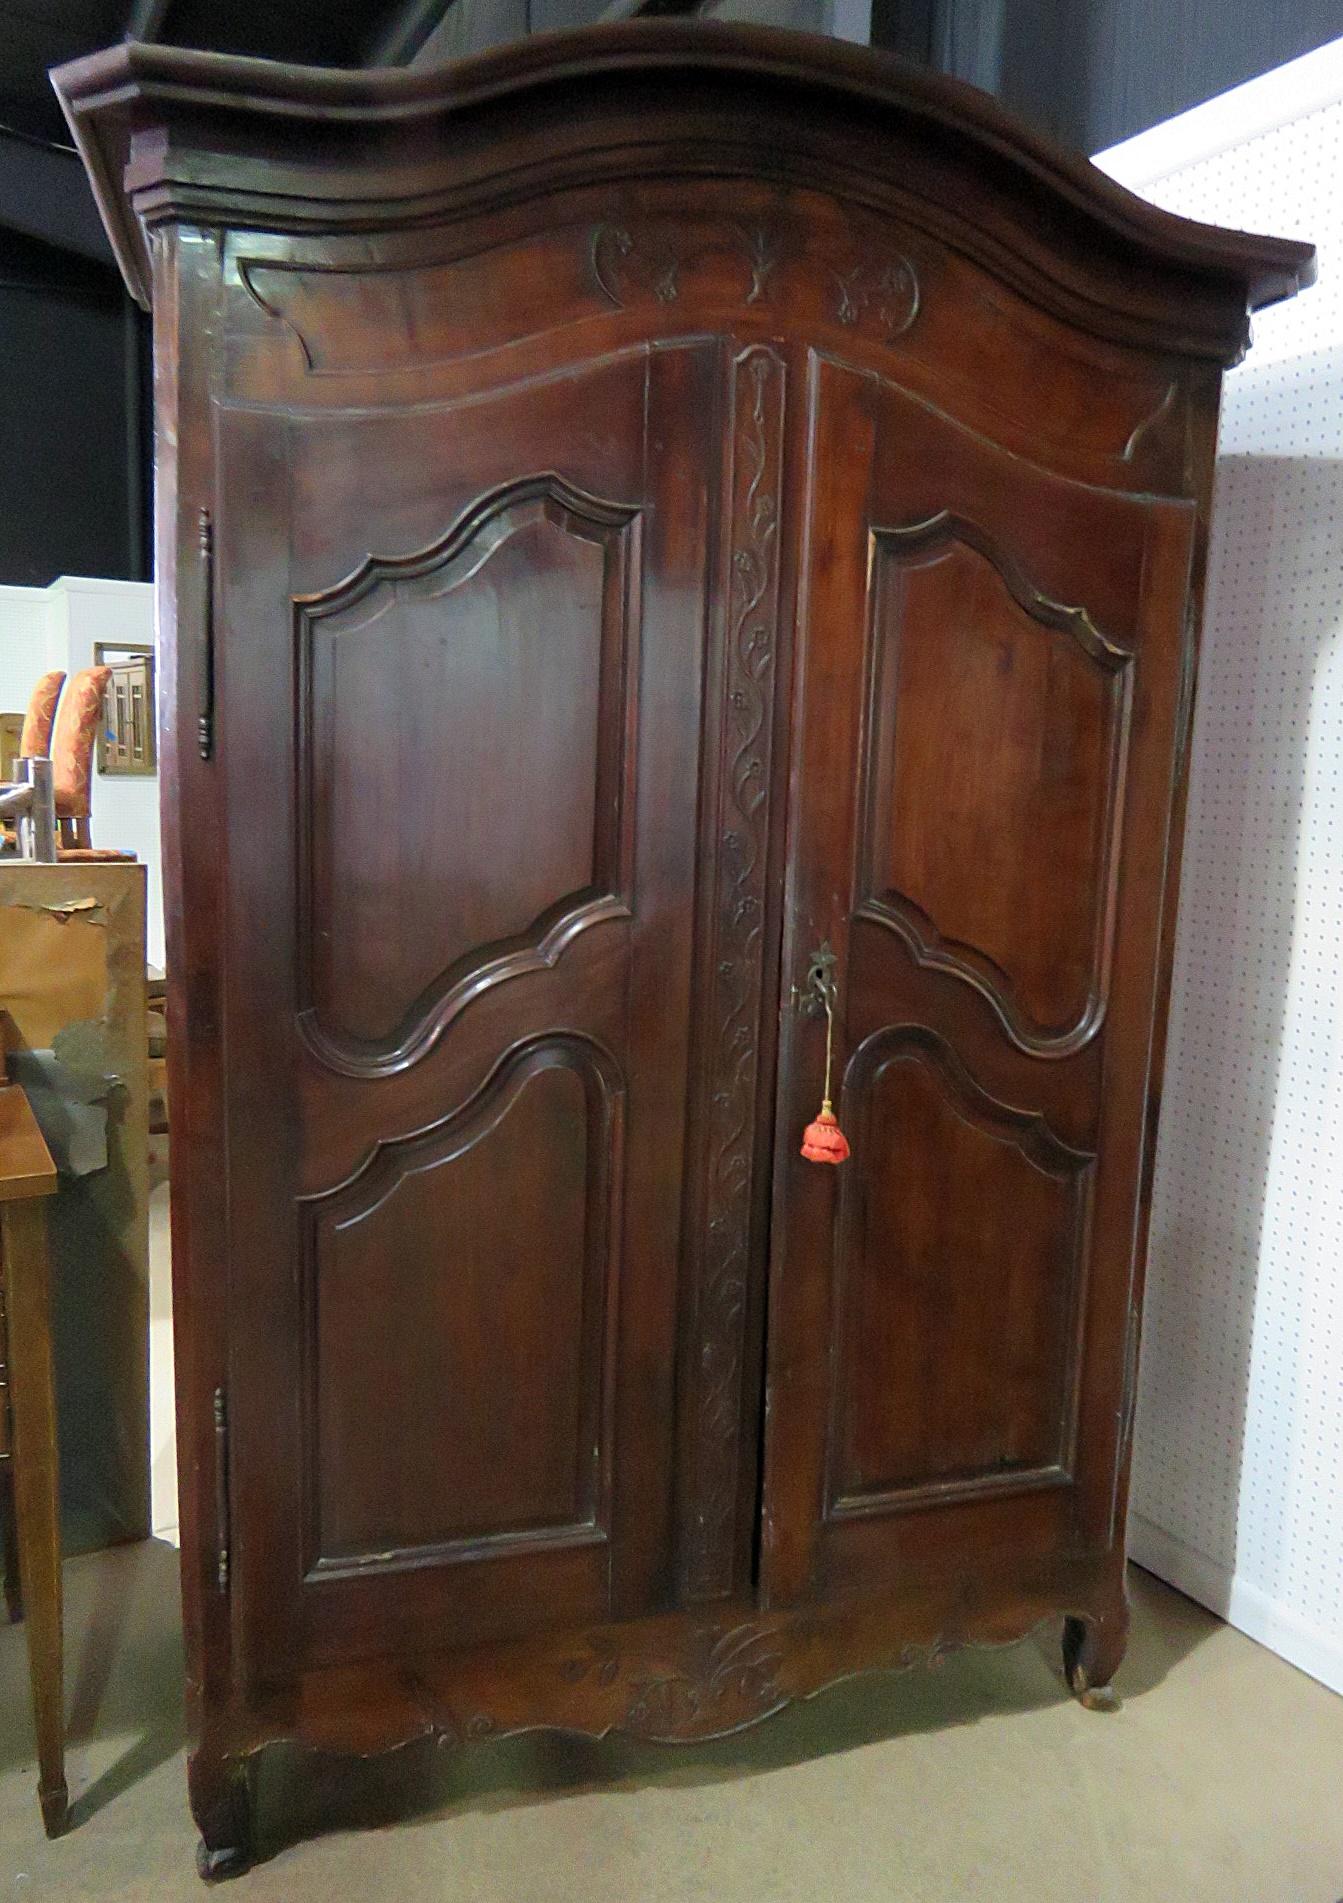 Antique French Provincial style armoire with 2 doors containing 8 shelves.